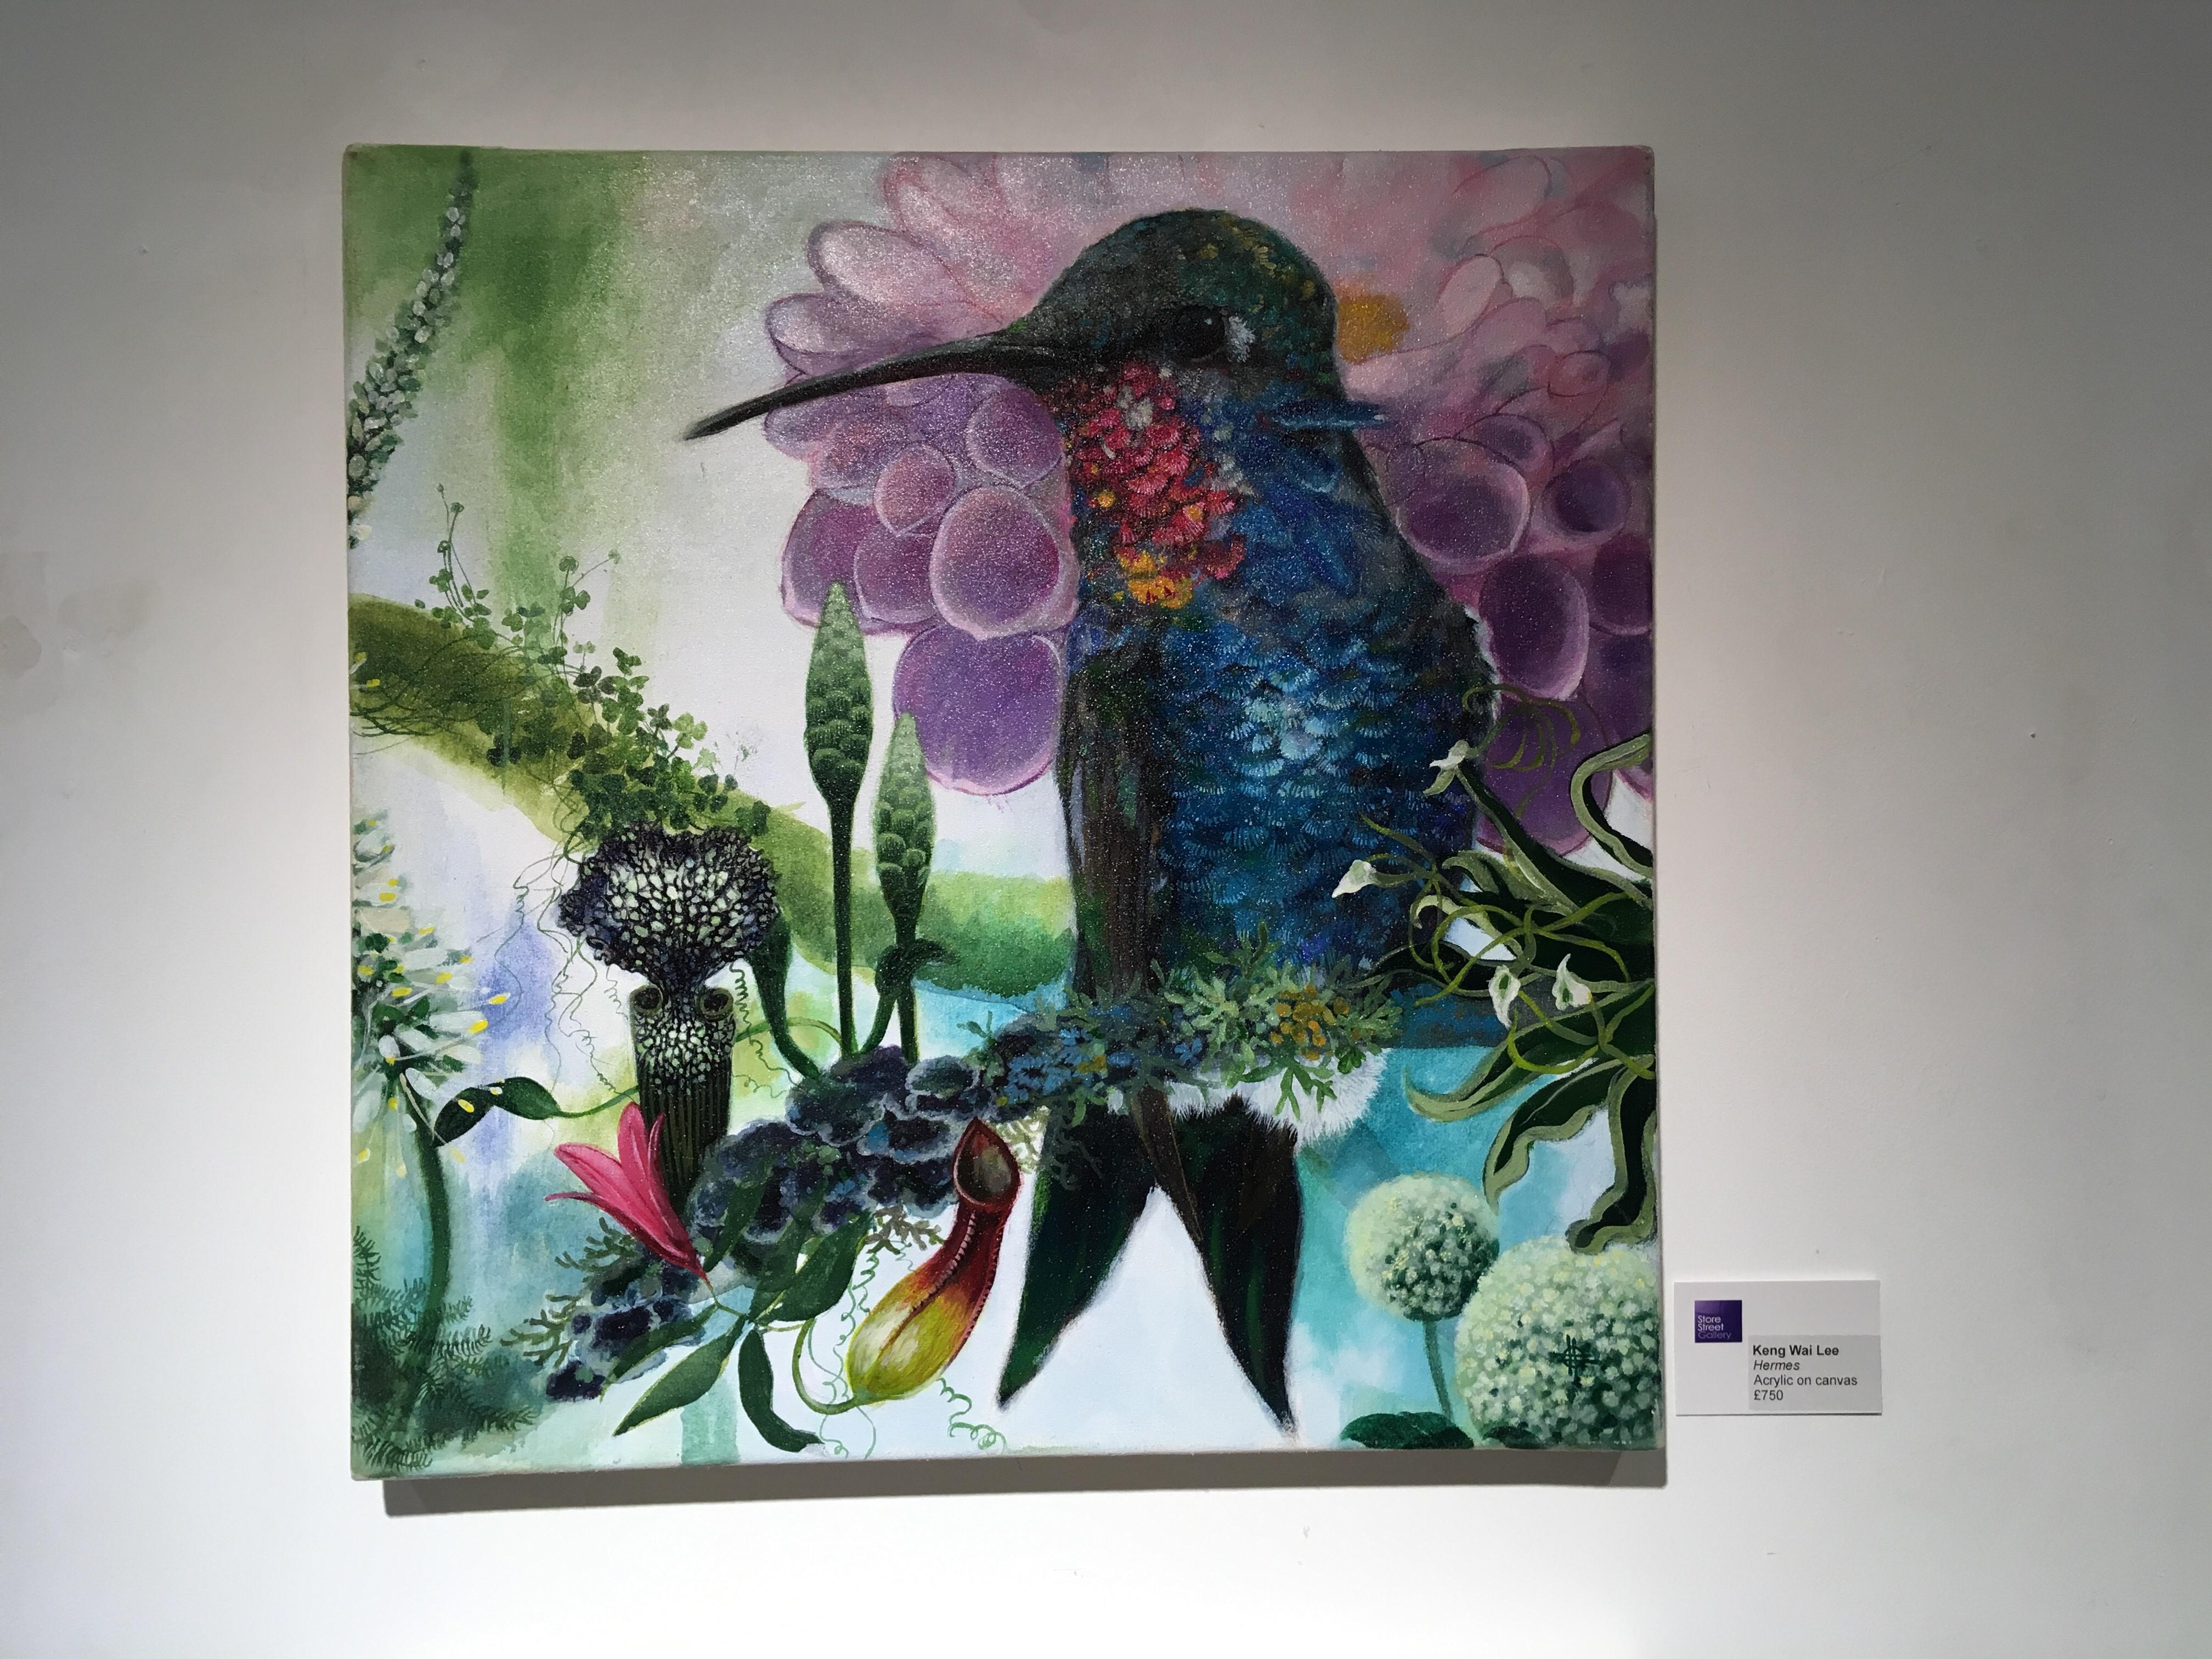 Hermes - contemporary vibrant colorful nature bird flora acrylic painting - Painting by Keng Wai Lee